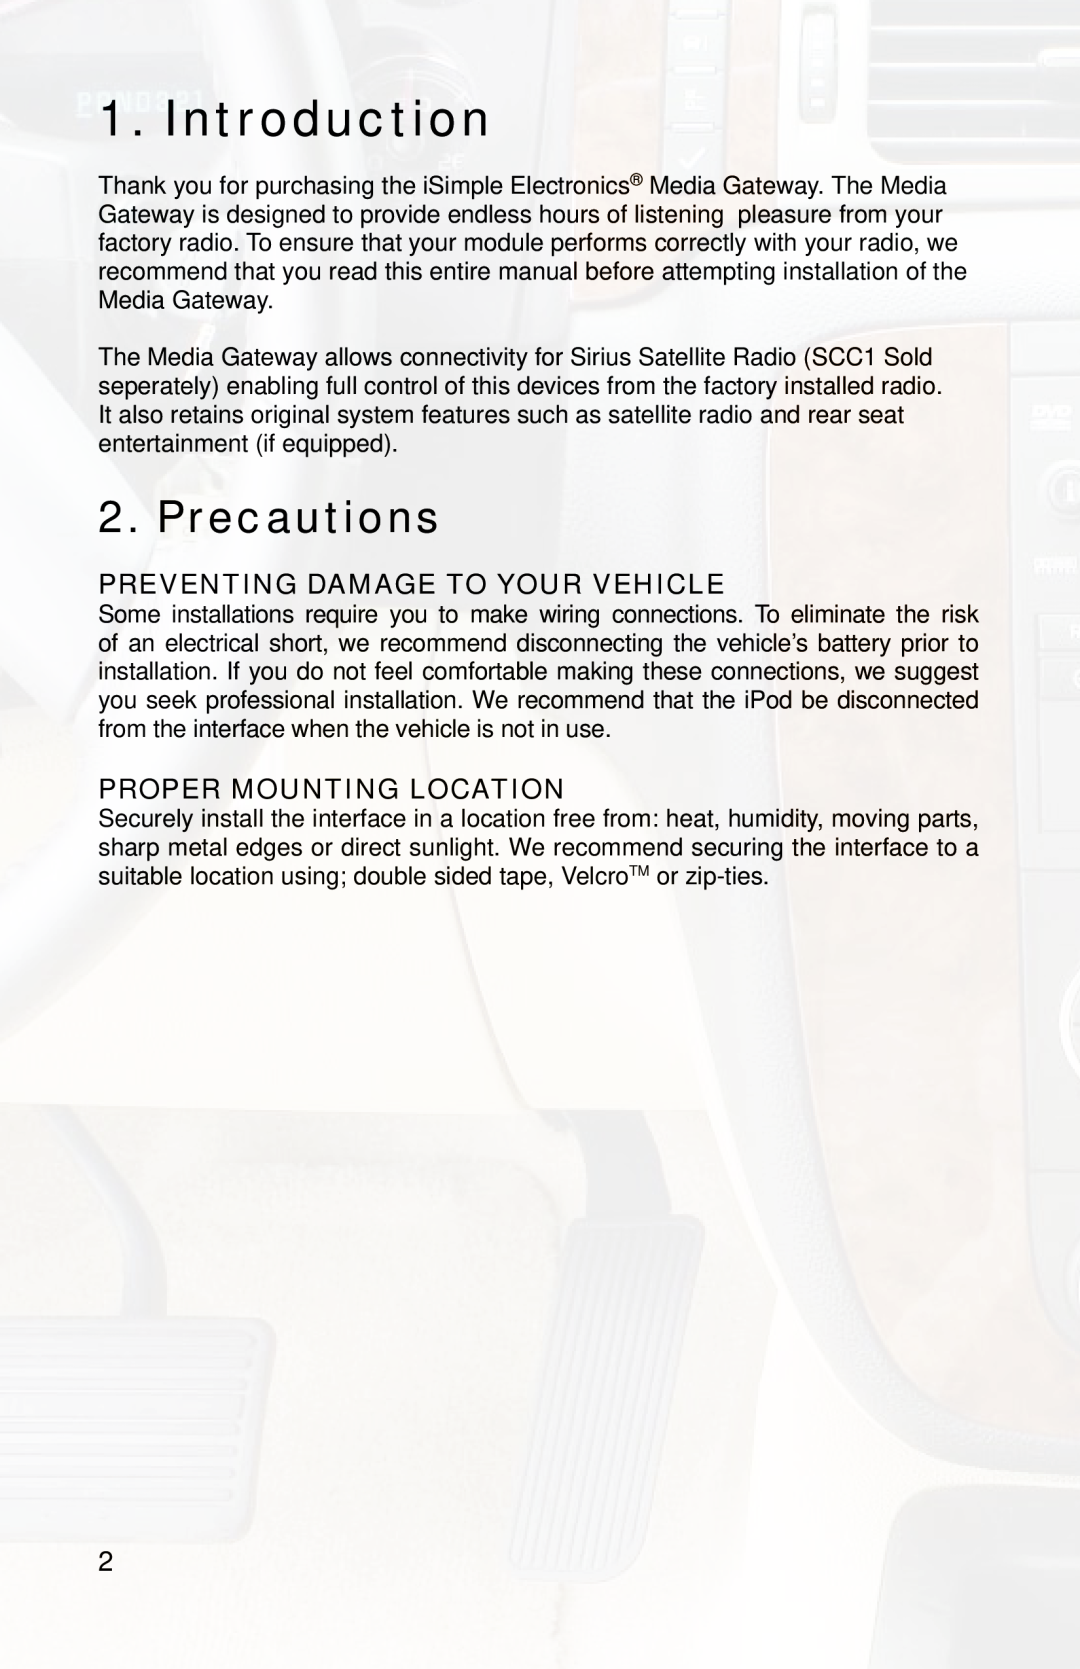 iSimple PGHGM1 owner manual Introduction, Precautions, Preventing Damage To Your Vehicle, Proper Mounting Location 